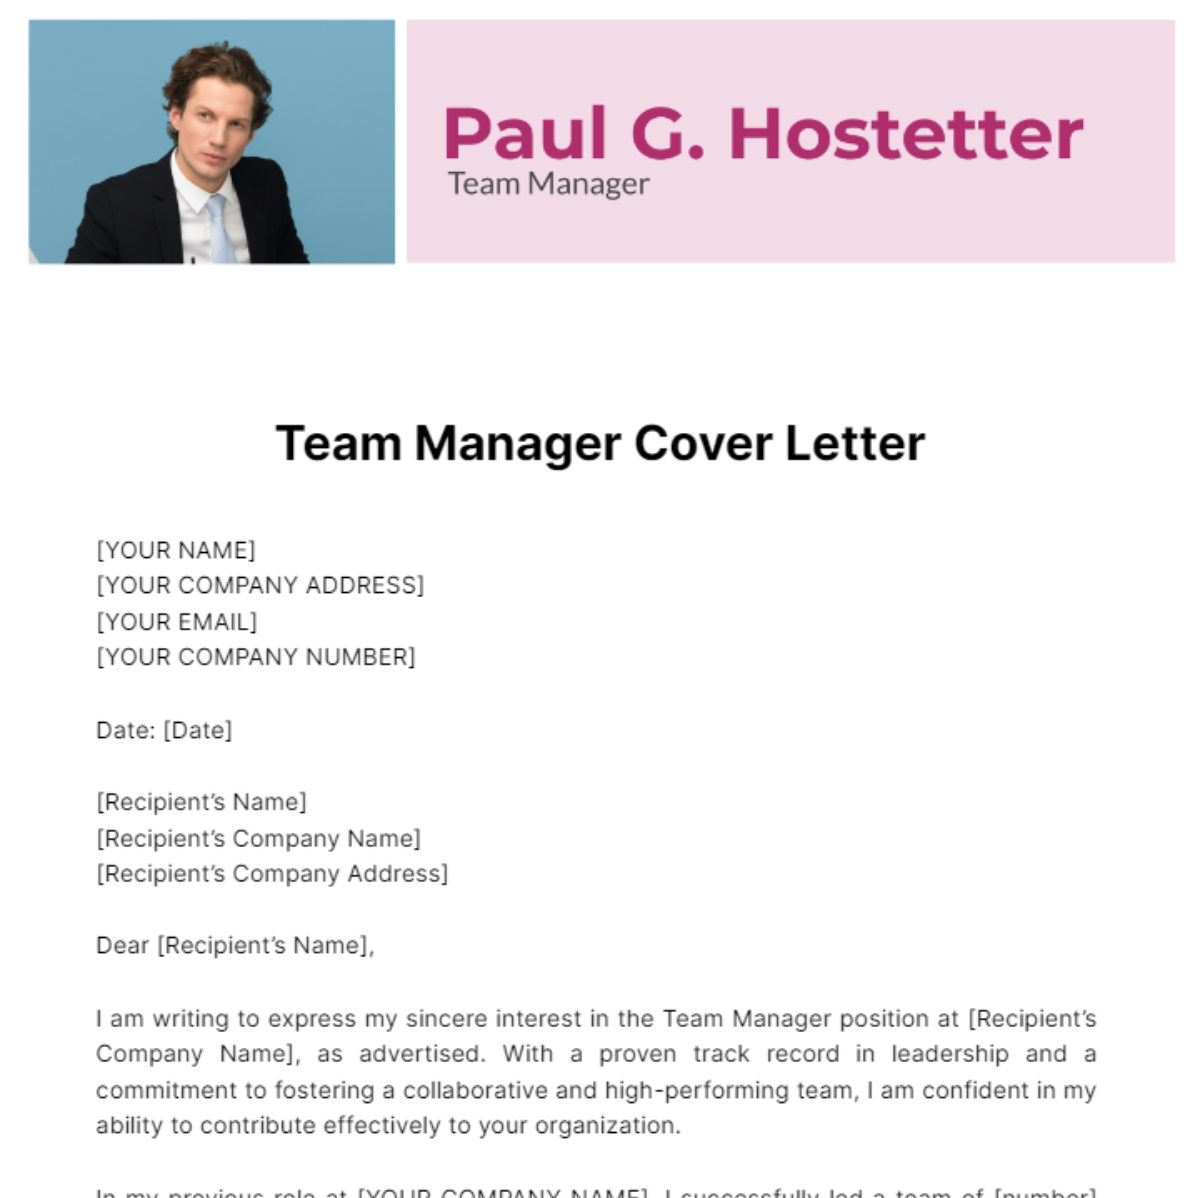 Team Manager Cover Letter Template